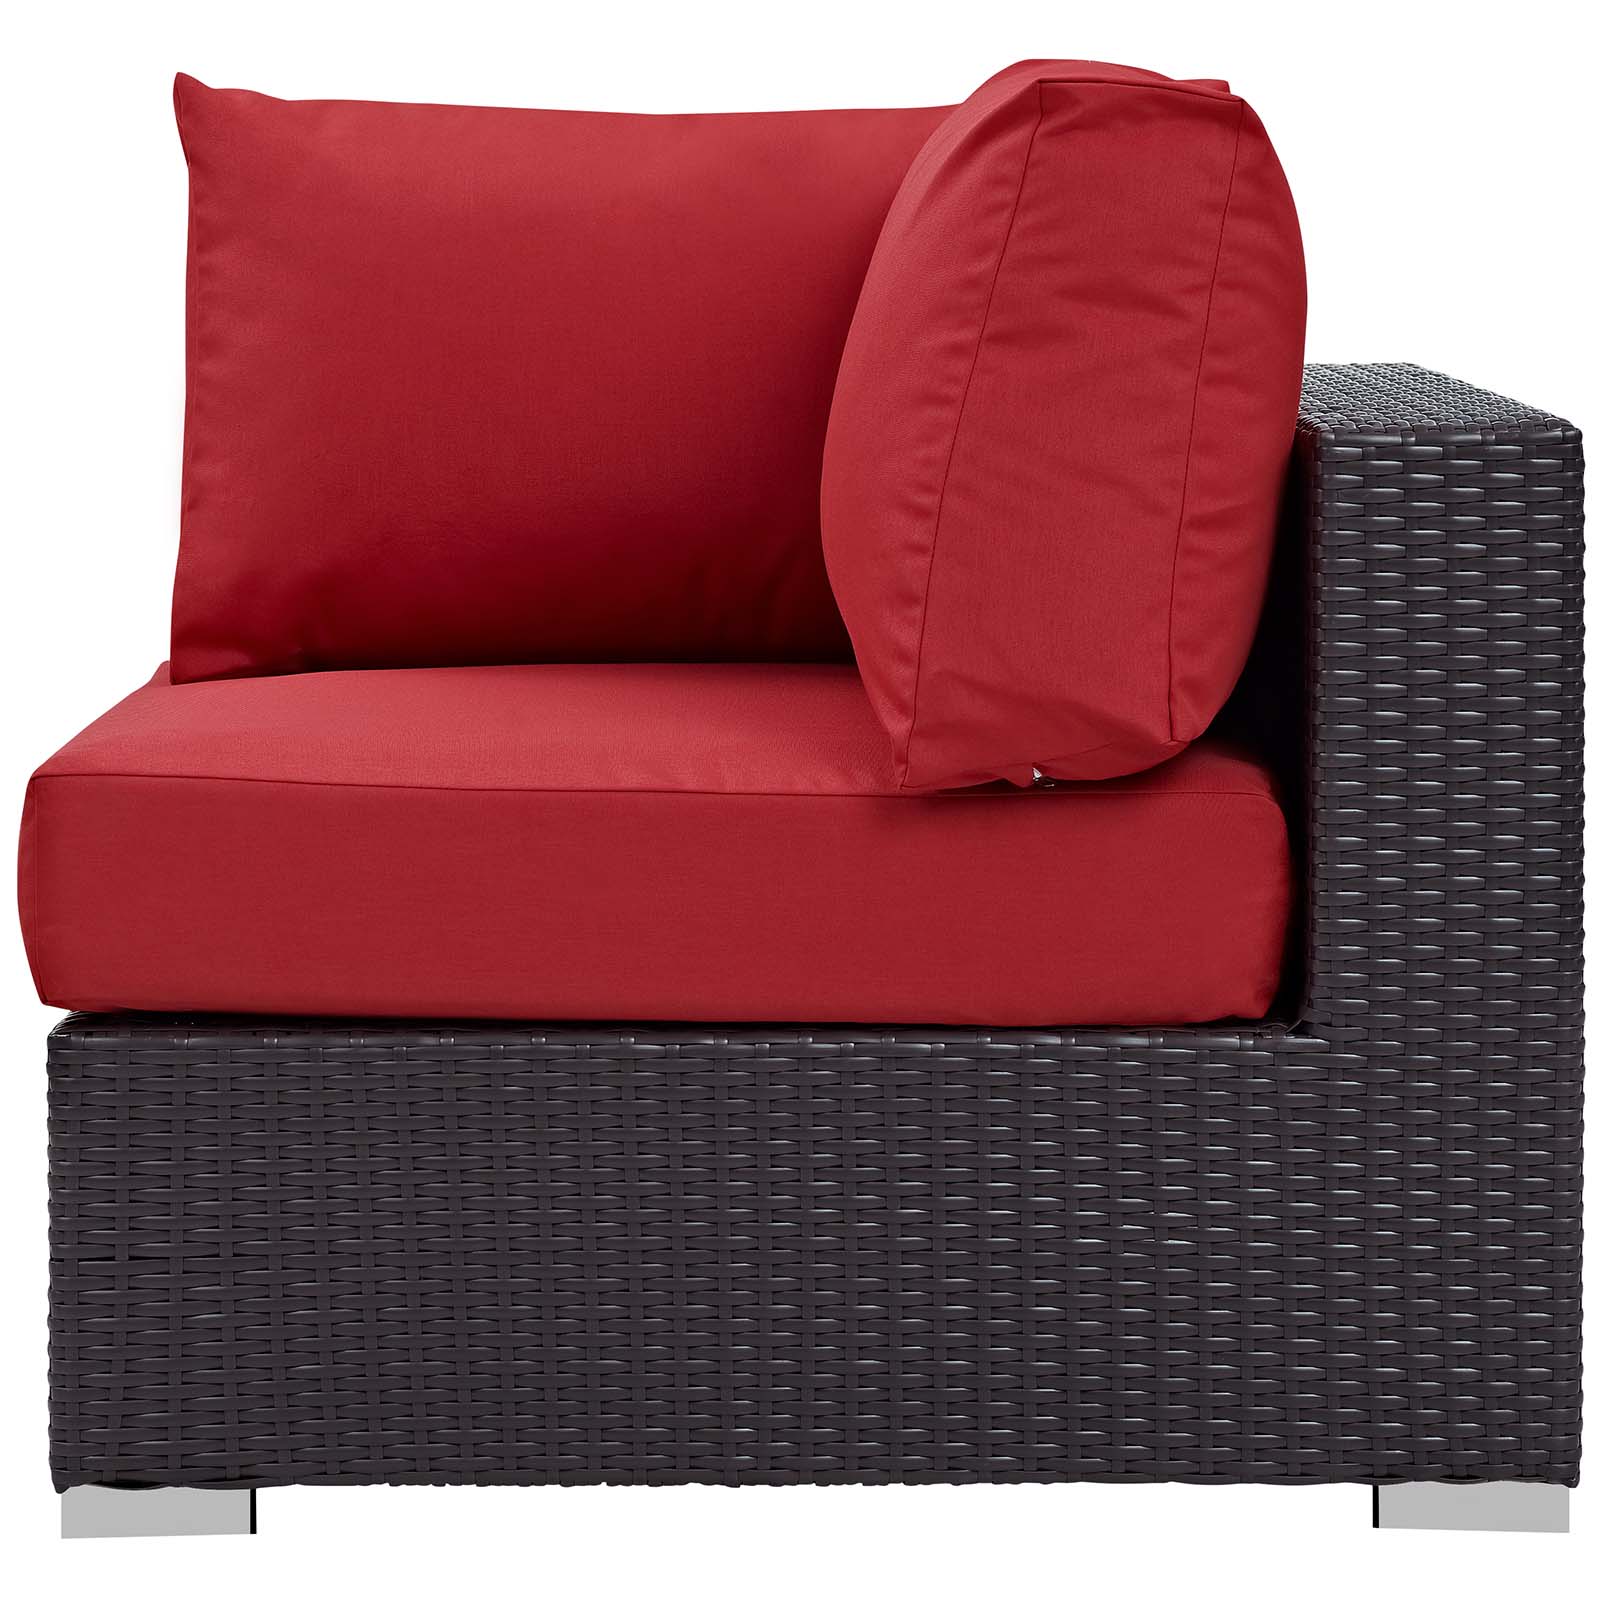 Contemporary Modern Urban Designer Outdoor Patio Balcony Garden Furniture Lounge Sofa, Chair and Coffee Table Fire Pit Set, Fabric Rattan Wicker, Red - image 5 of 8